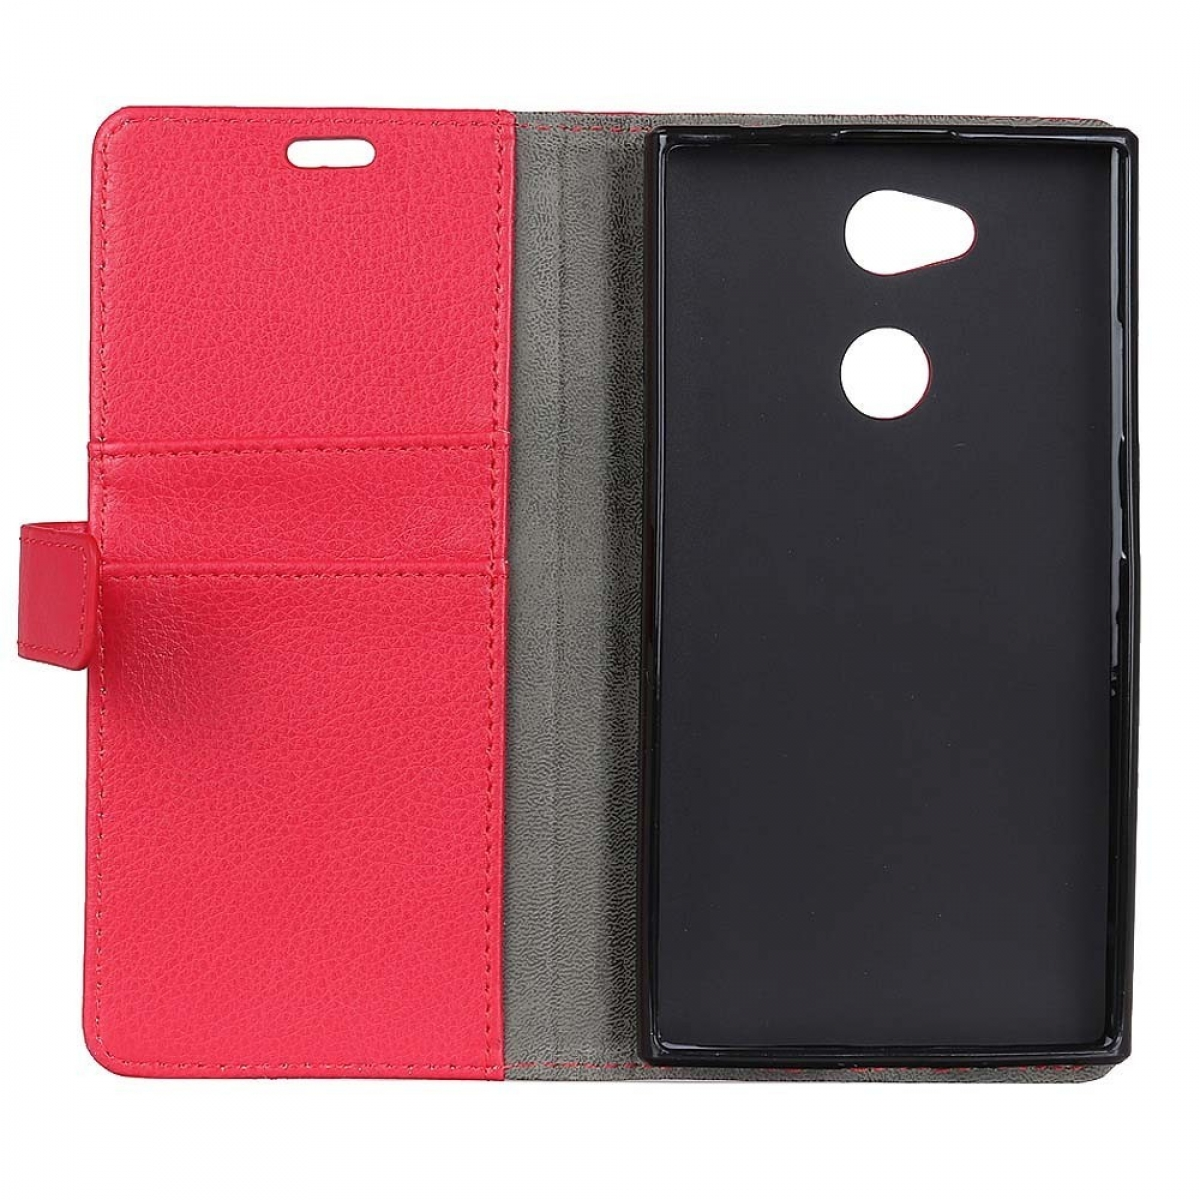 - Sony, L2, CASEONLINE Rot Xperia Bookcover, Rot, Klappbare